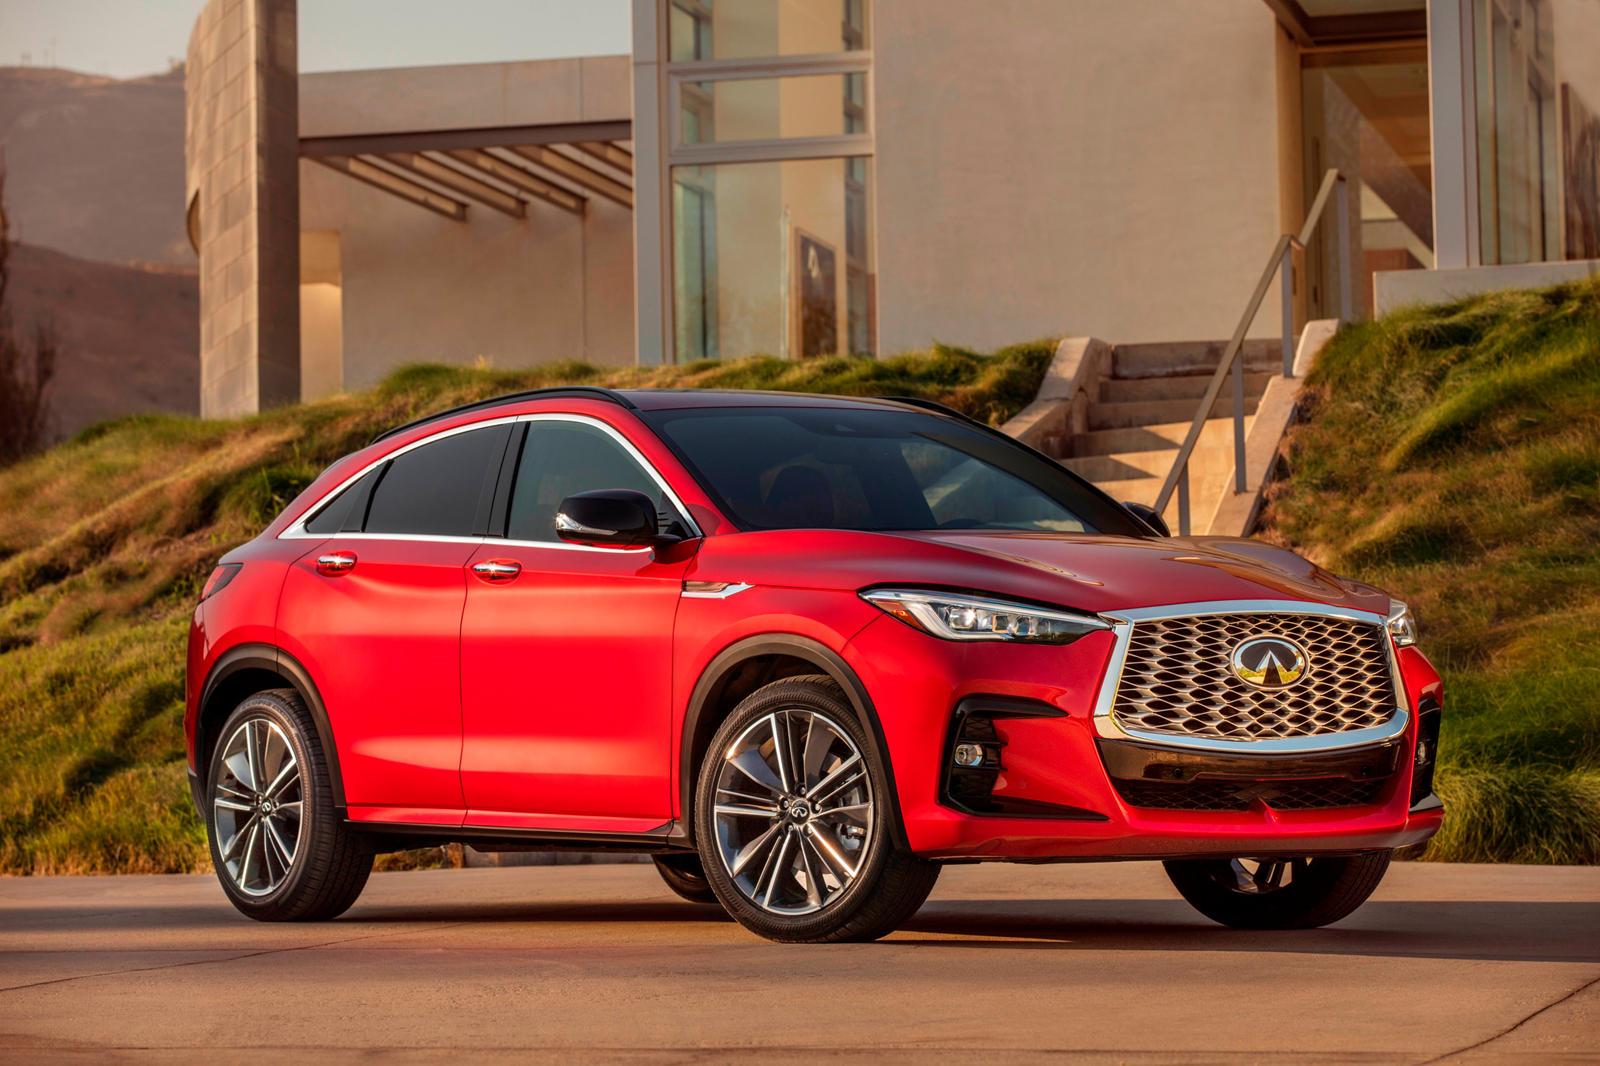 Meet The 2022 Infiniti QX55: A Stylish Coupe-SUV With Plenty Of Soul